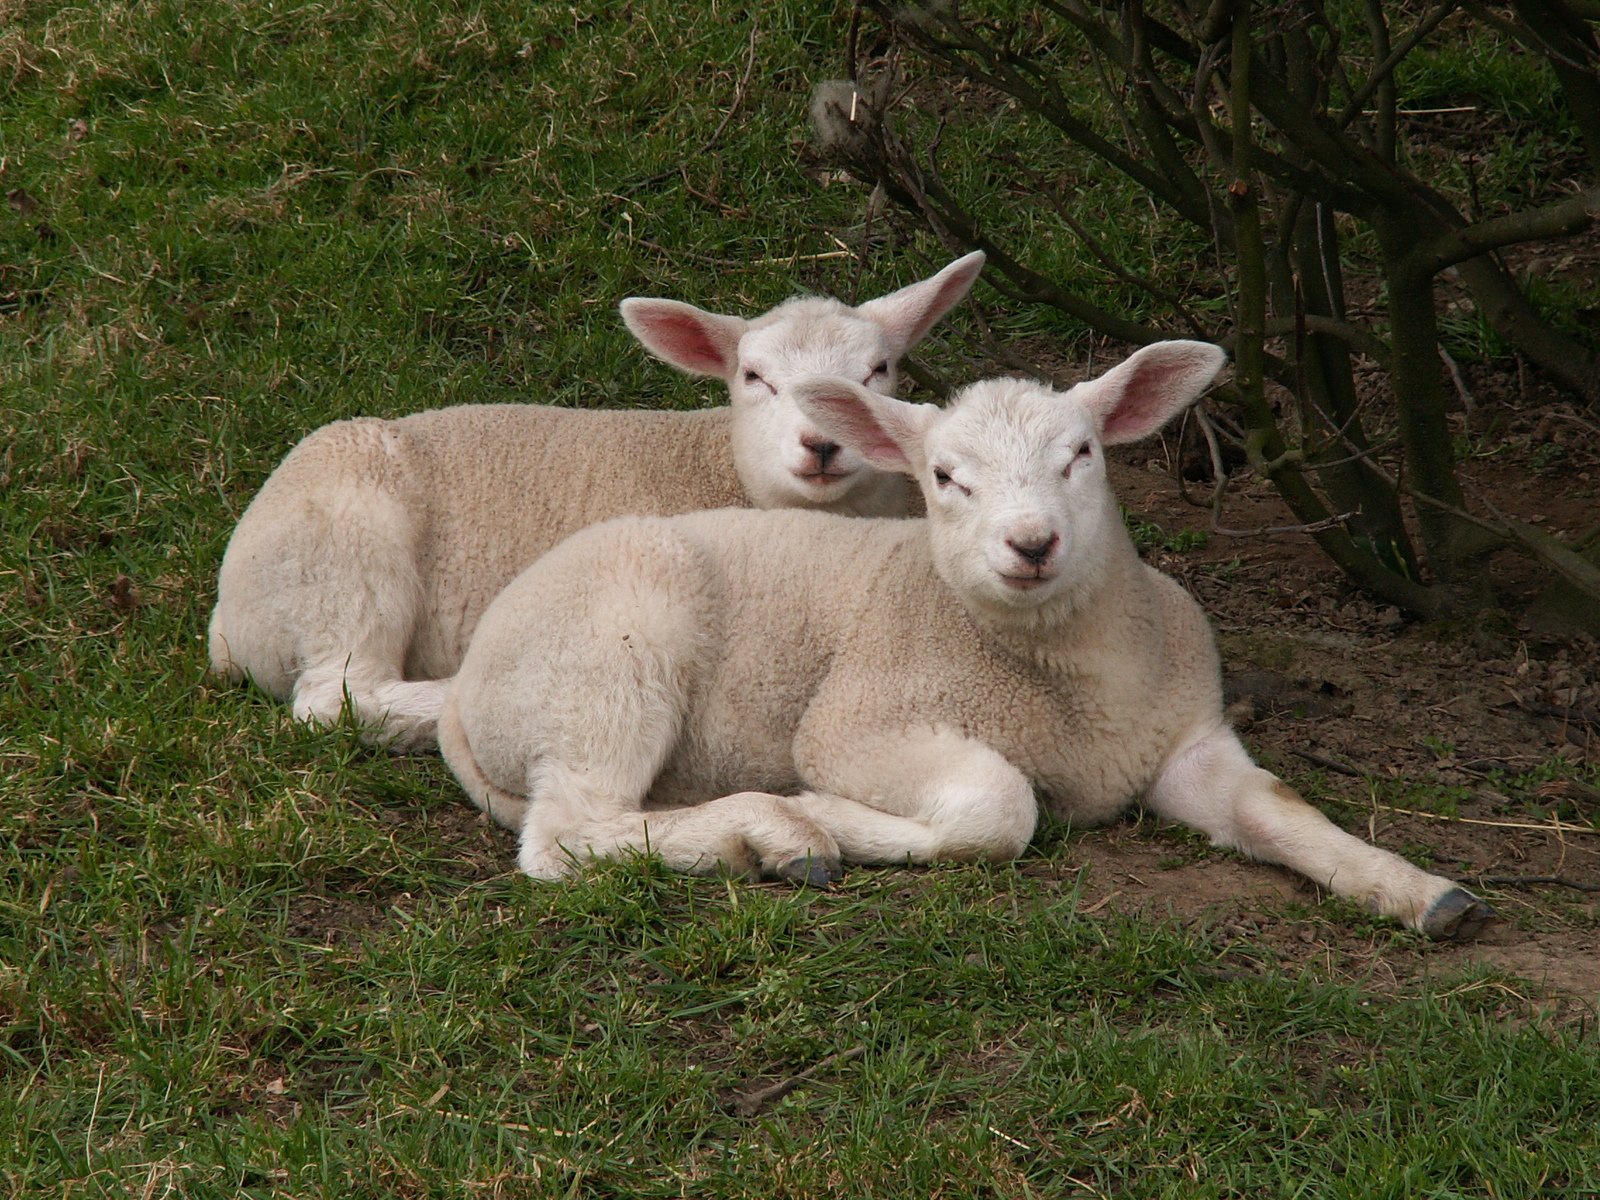 two baby sheep cuddling together on the ground